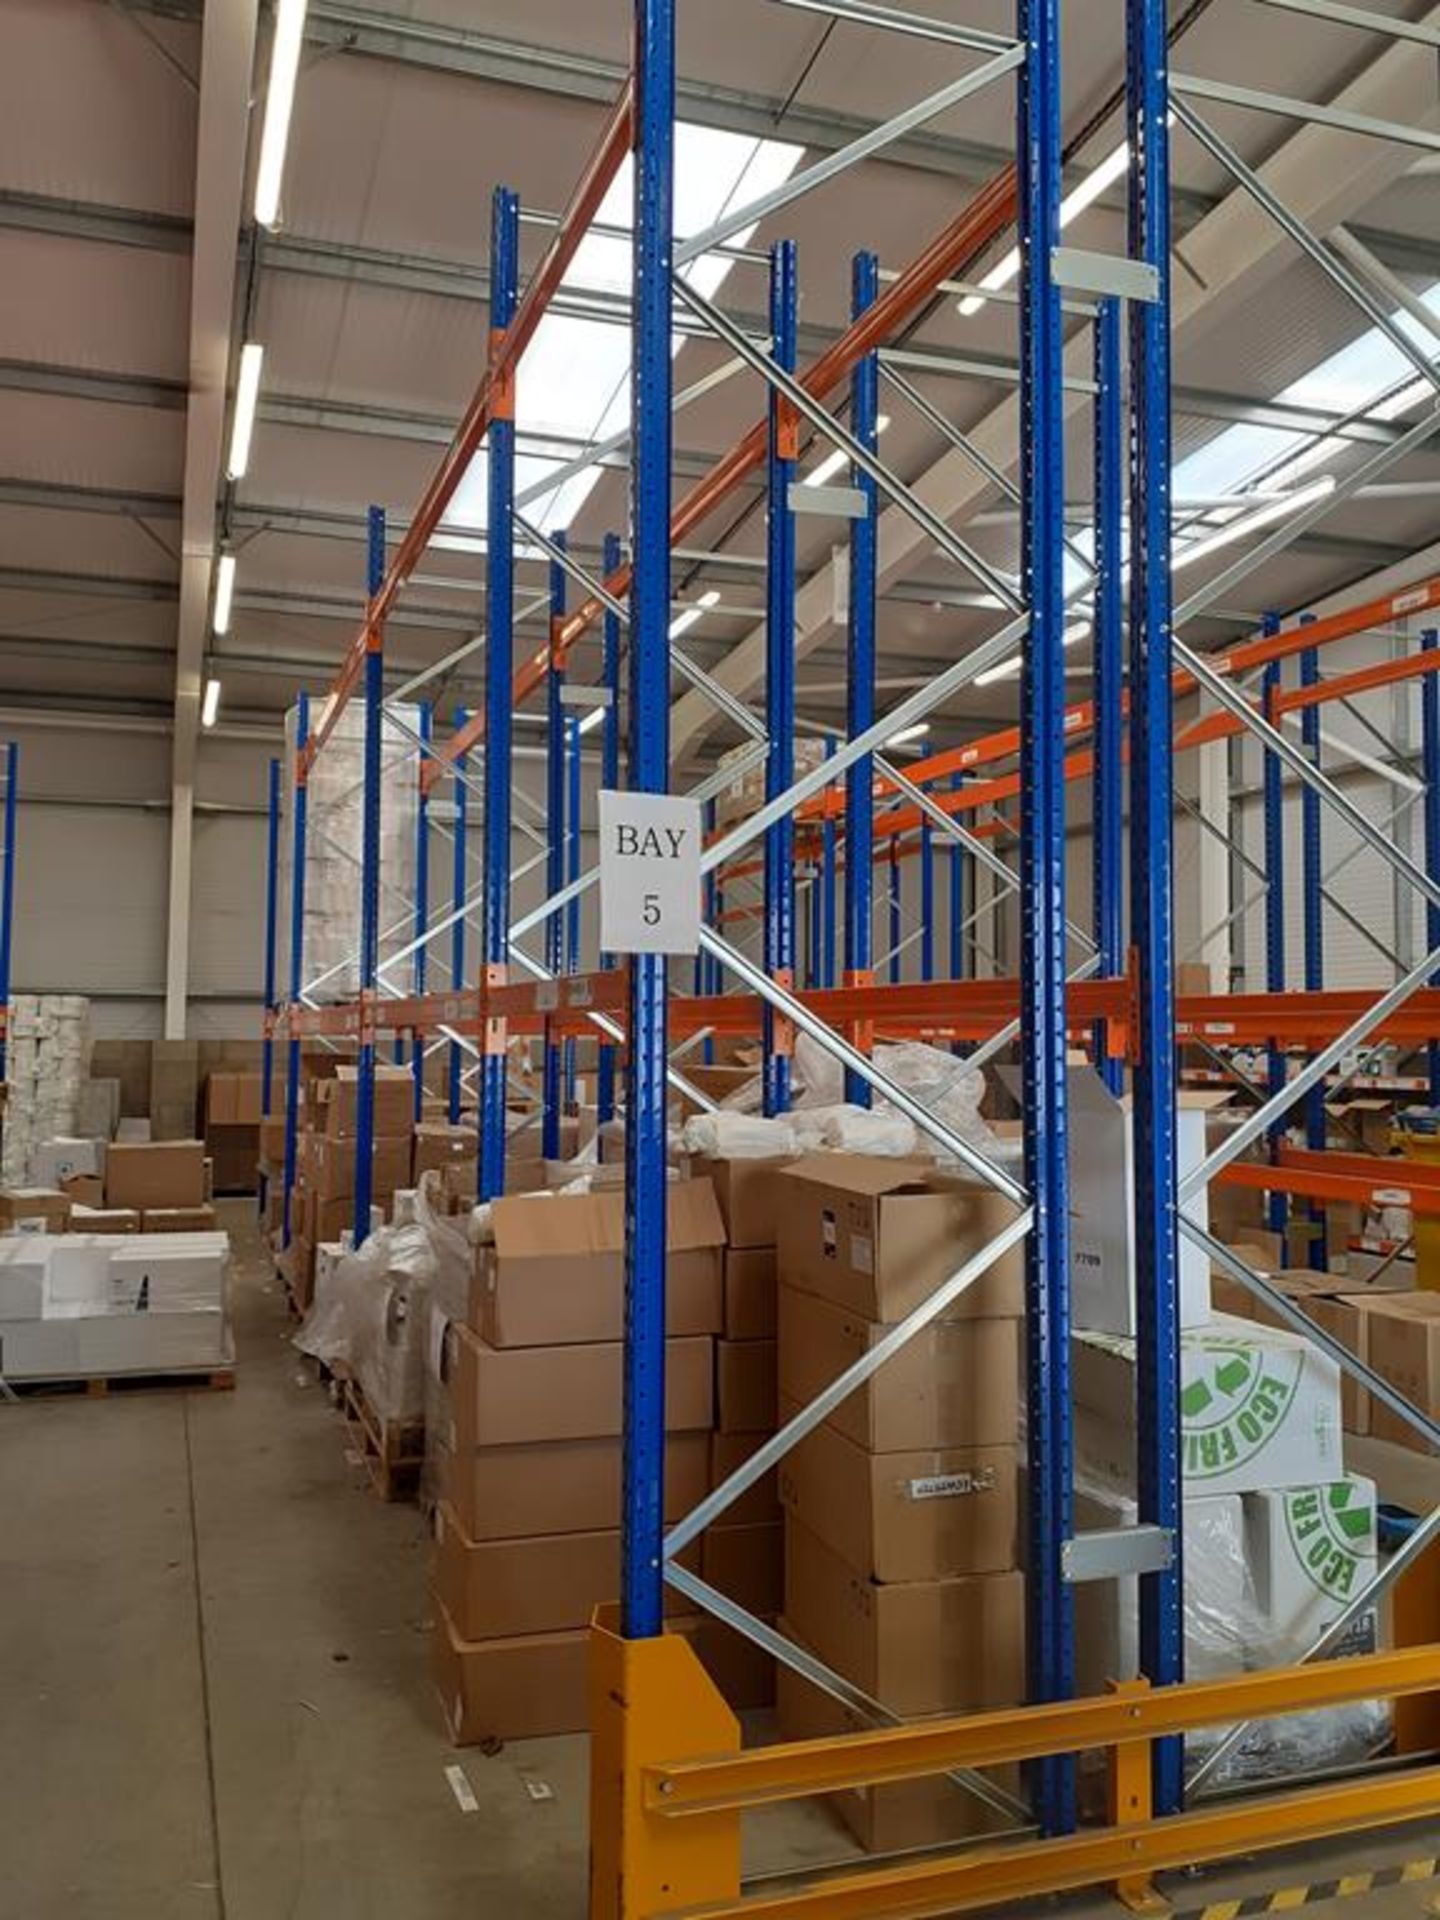 8 Bays of Pallet Racking - 10 uprights (4000mm) and 14 cross beams - ( 4 x 3700mm), (6 x 2700mm) - Image 2 of 2